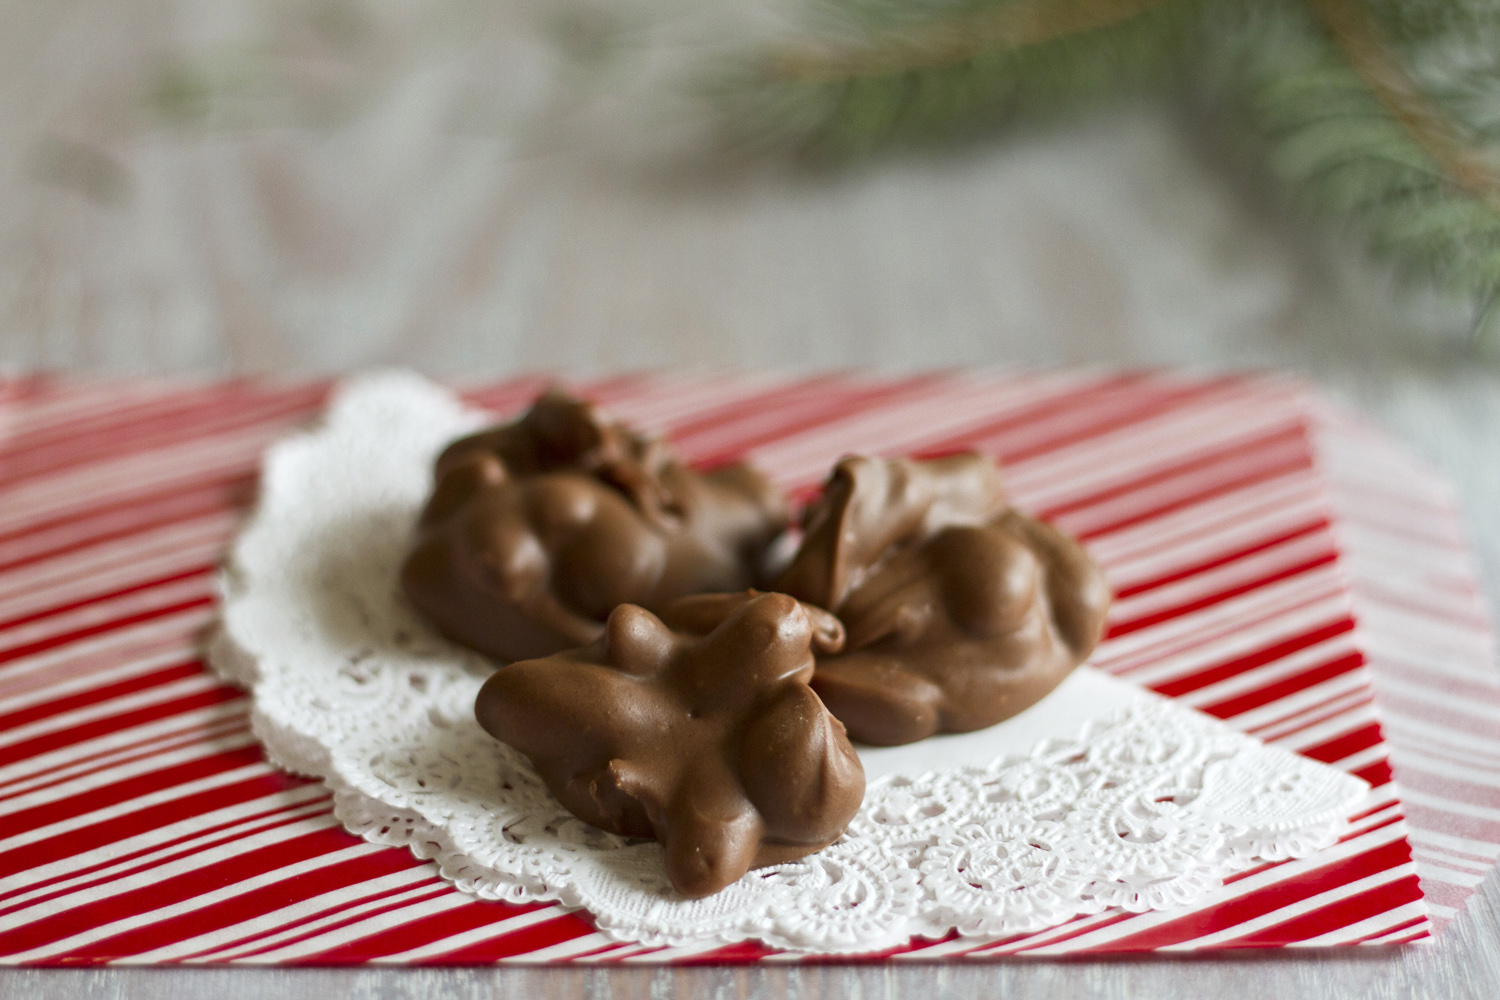 Easy Peanut Clusters featured by Utah lifestyle blog, By Jen Rose